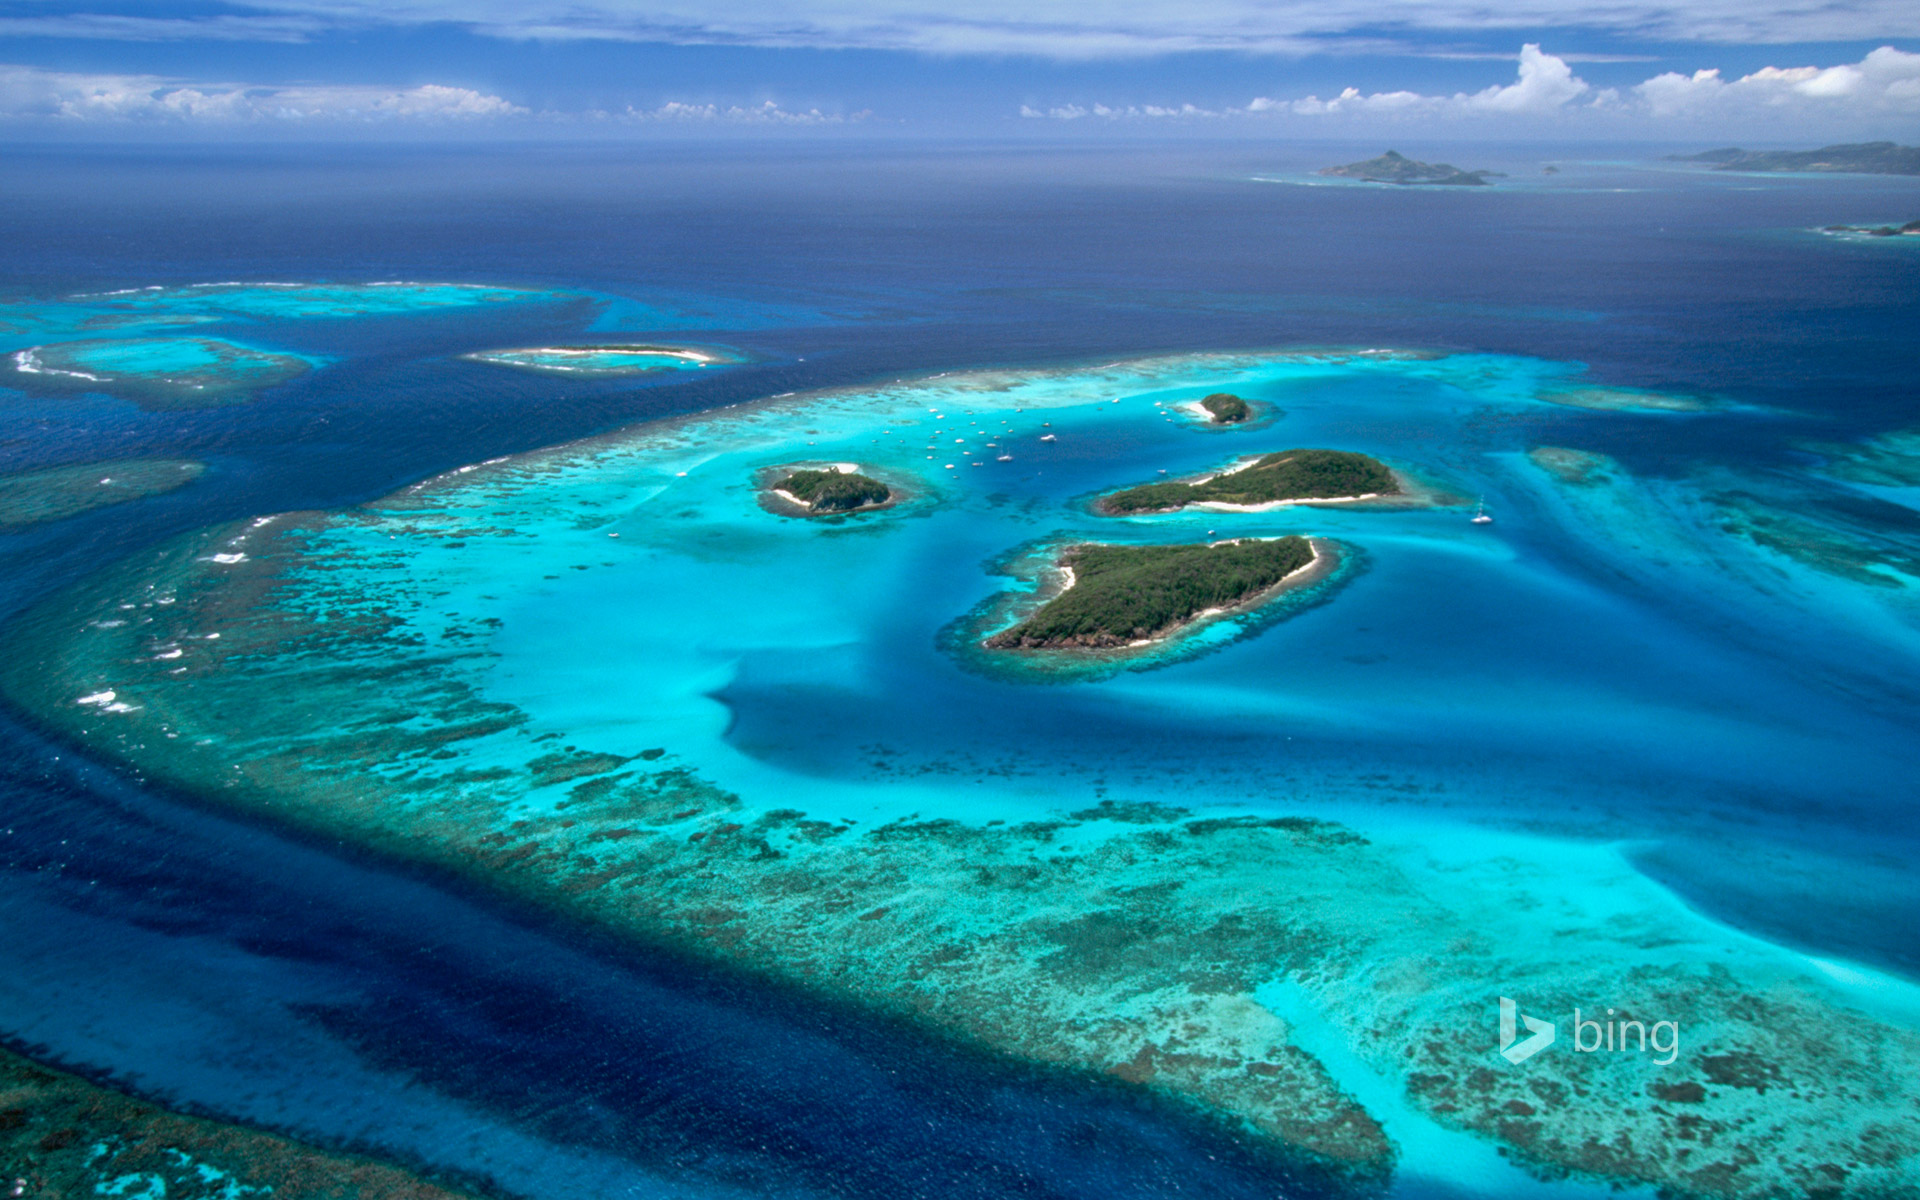 Tobago Cays group of islands, St. Vincent and the Grenadines